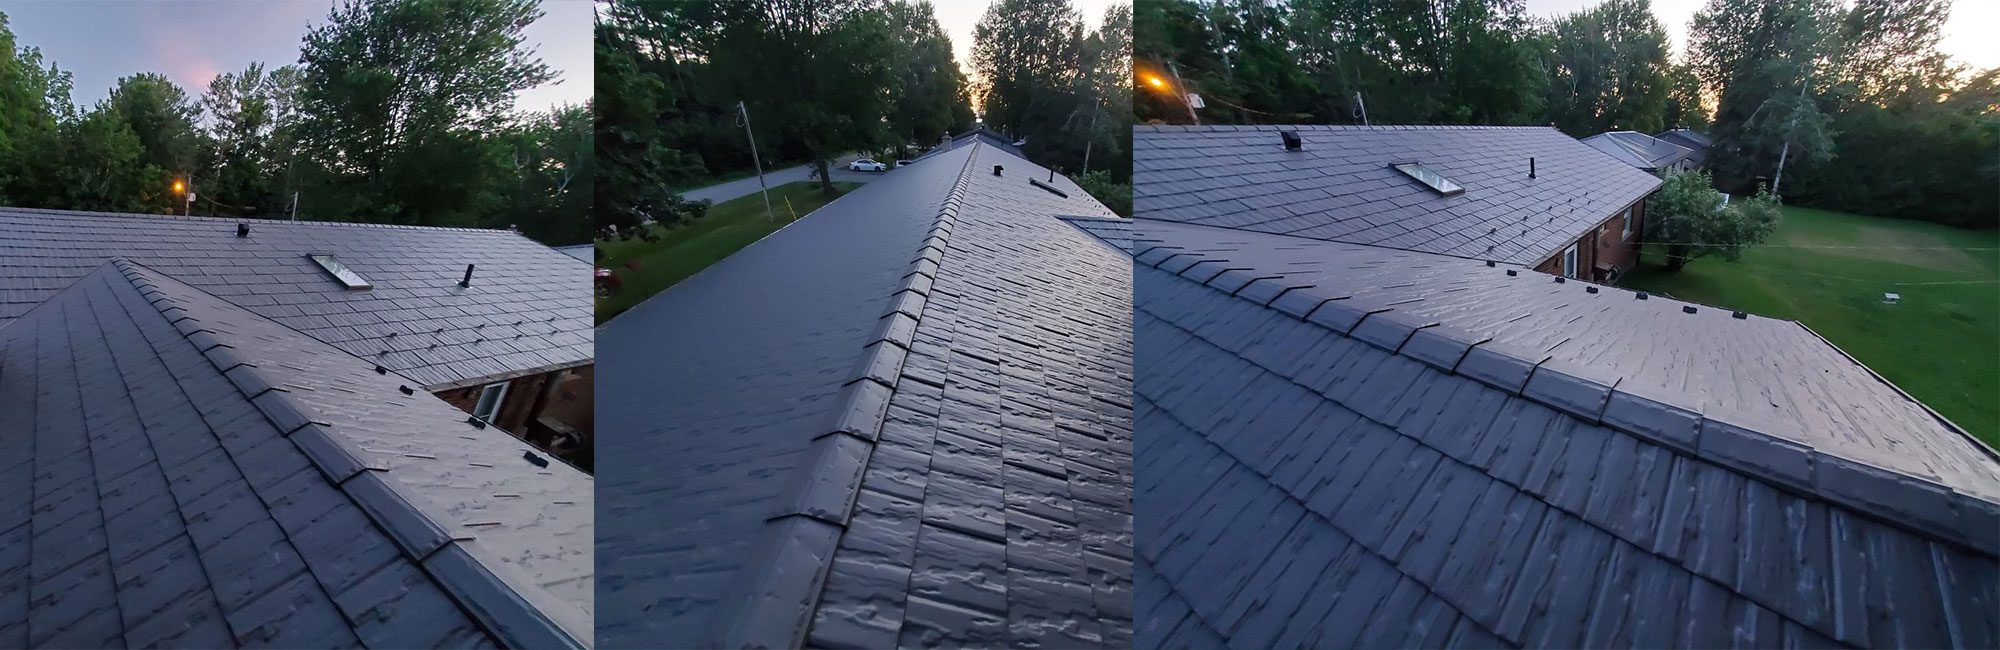 Metal Shingle Roofing System